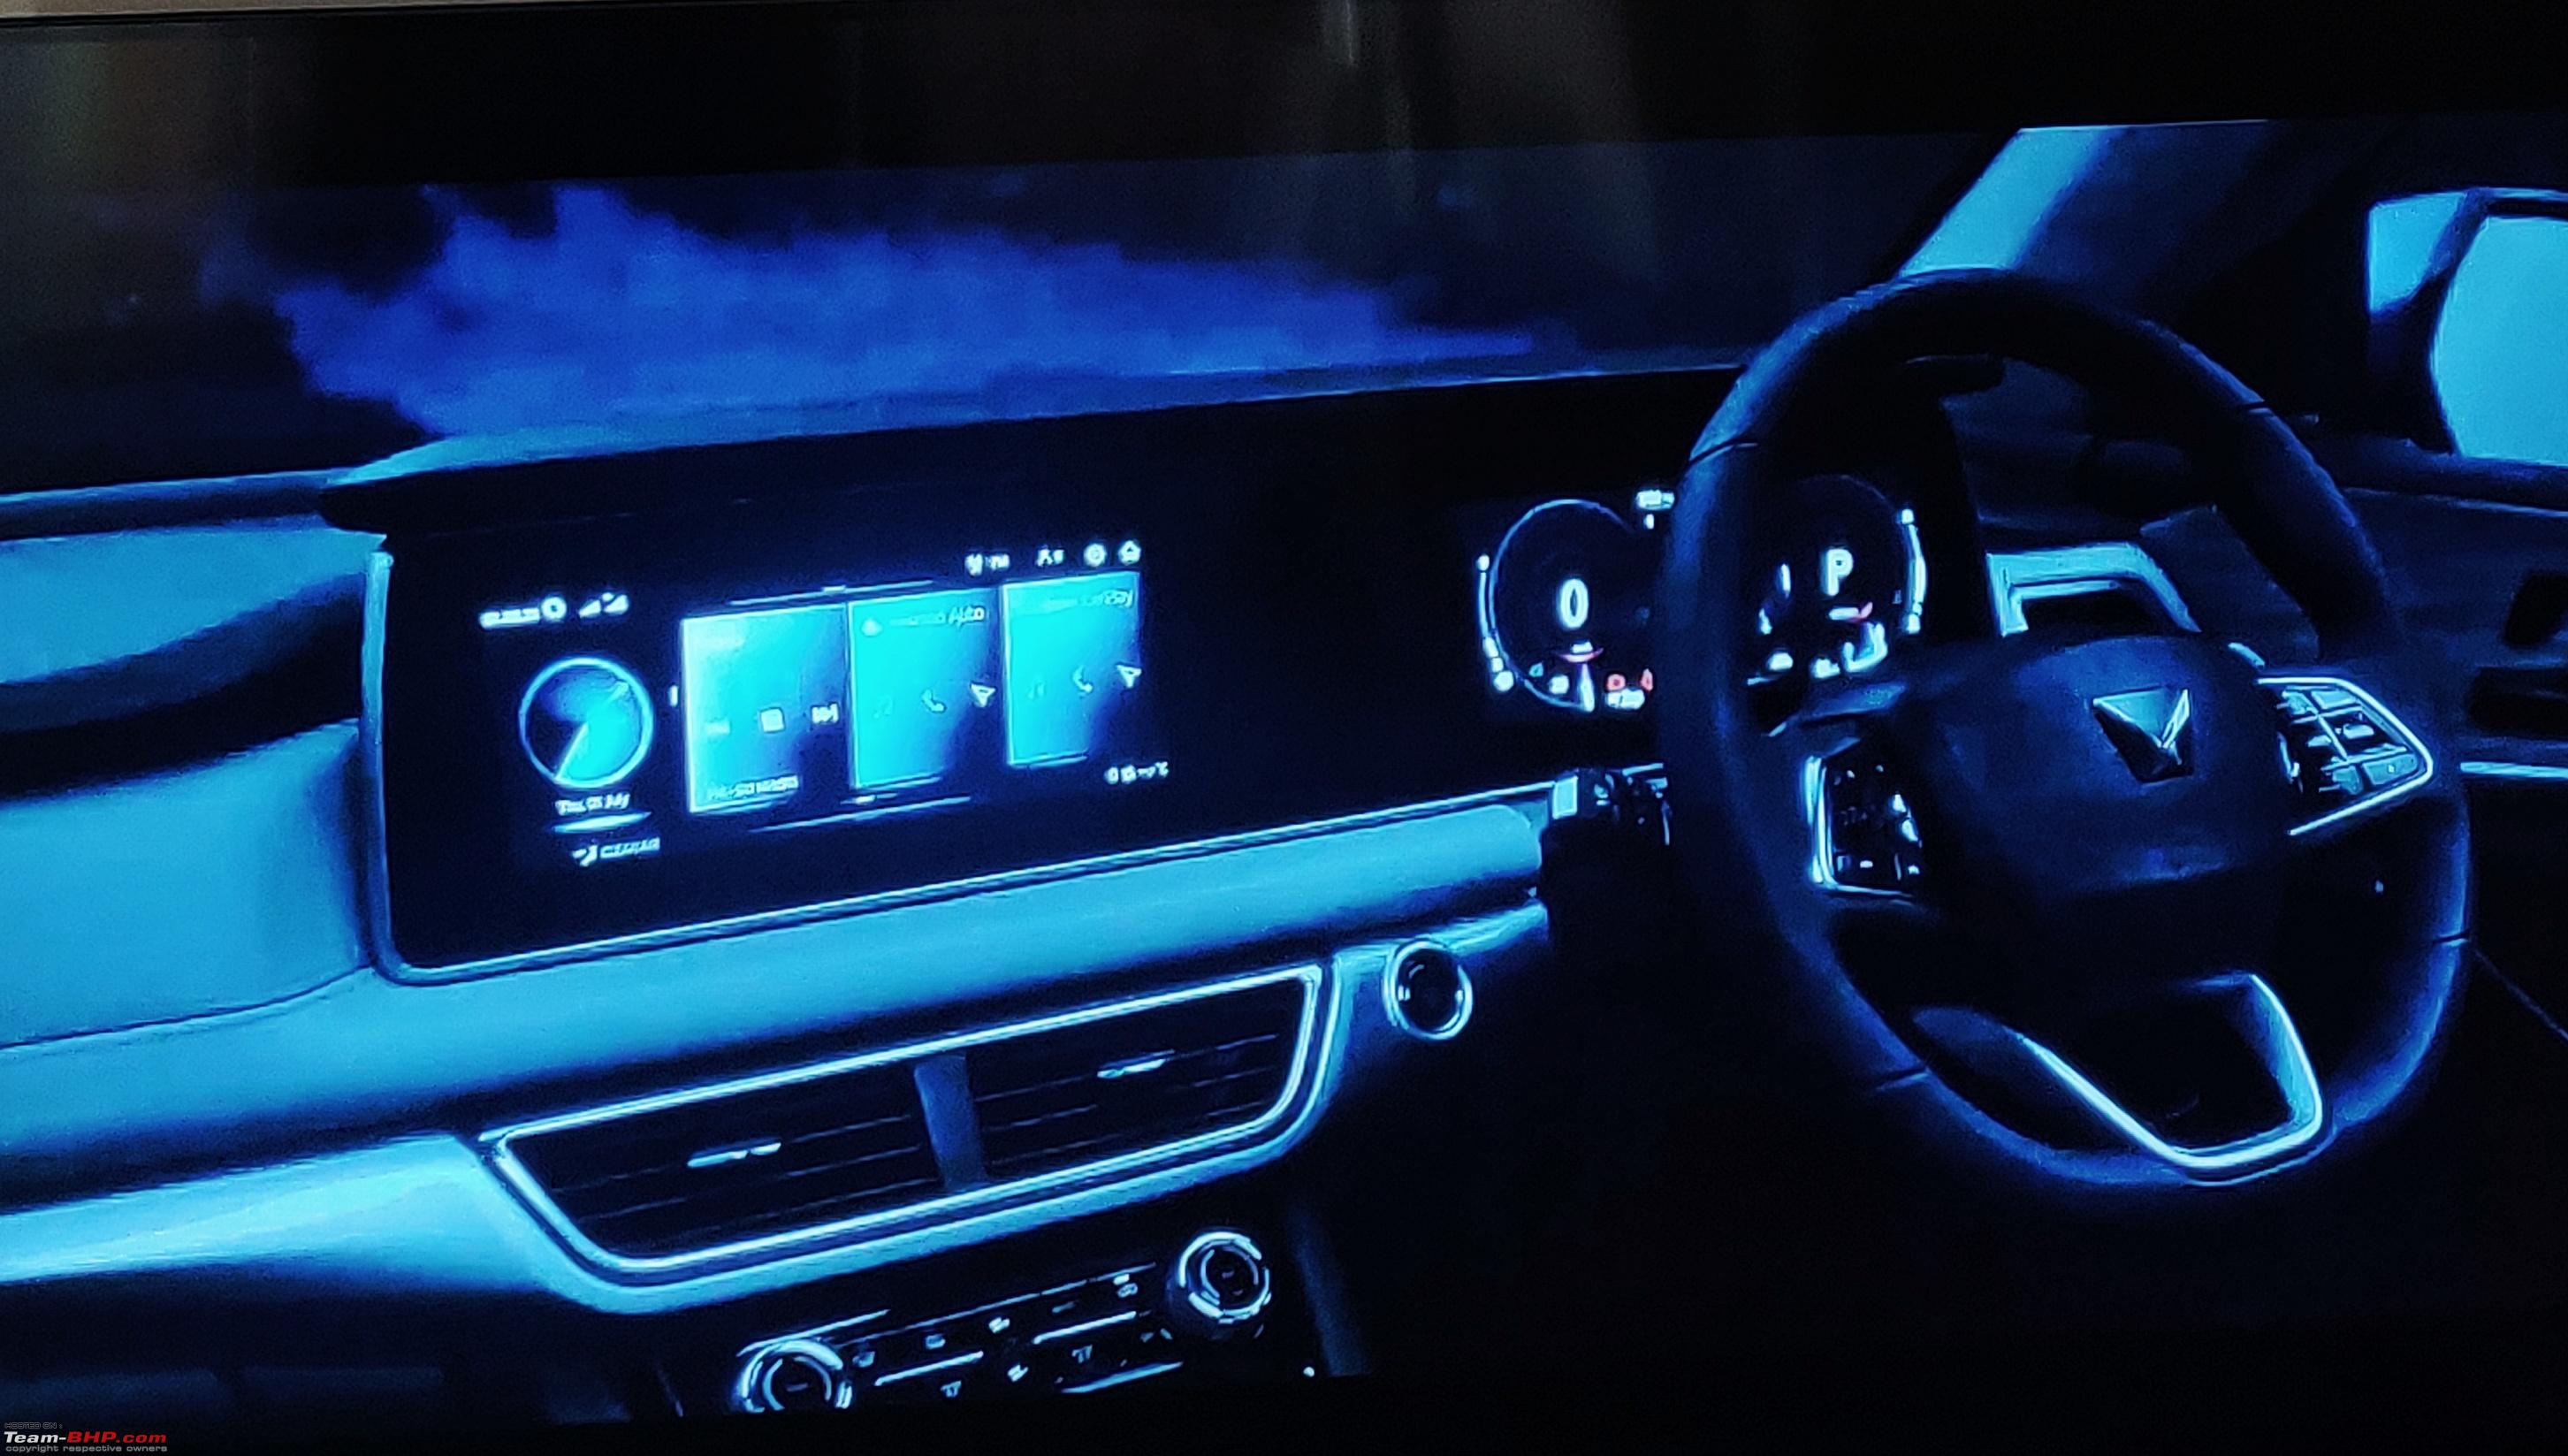 Xuv700 Gets A New Ambient Lighting Interior Setup! First On ! 